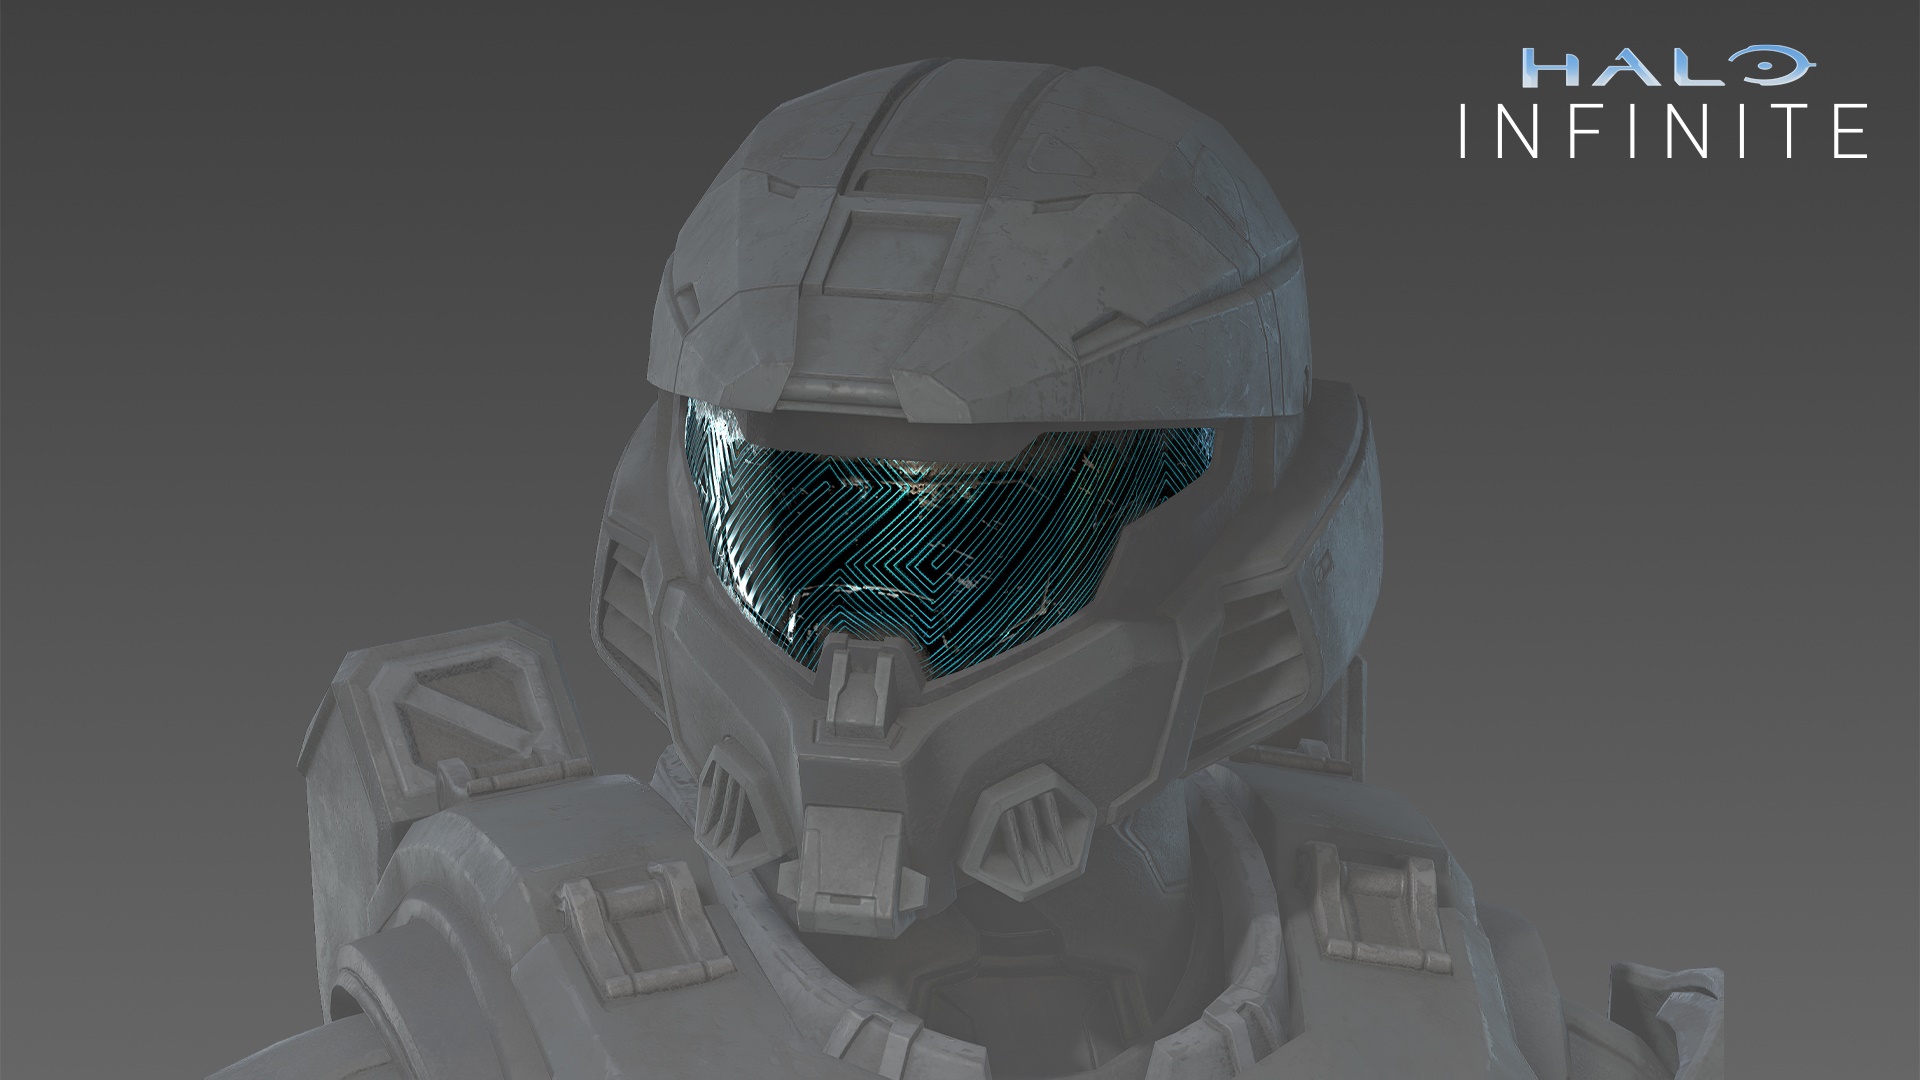 Halo Infinite image of the Essence Decompilation visor from the Banished Honor Operation Pass